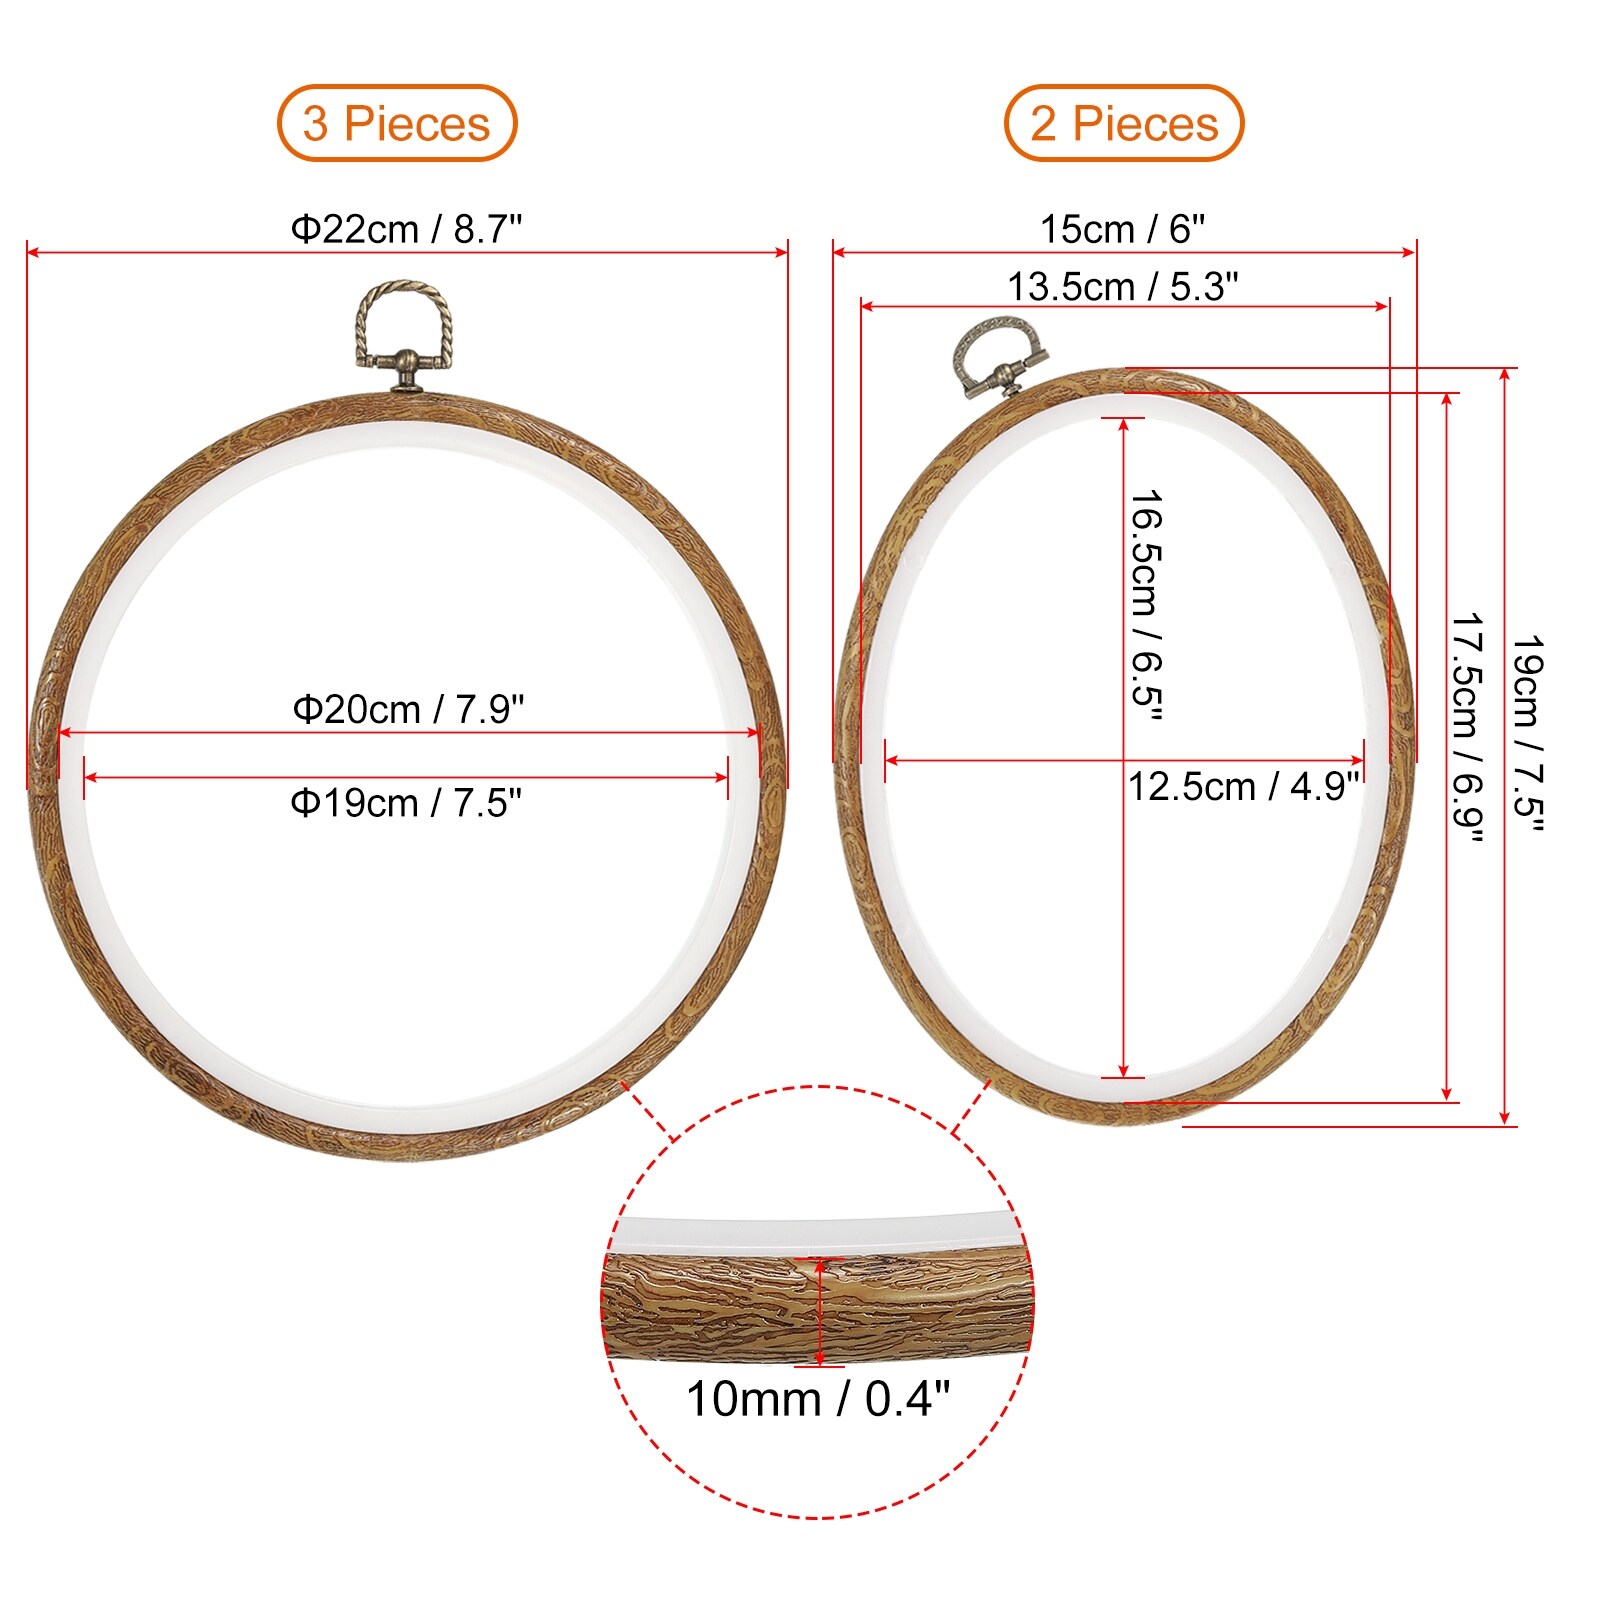 6 Pieces Embroidery Hoop Set Bamboo Circle Cross Stitch Hoop Ring 4 inch to  10 inch for Embroidery and Cross Stitch 